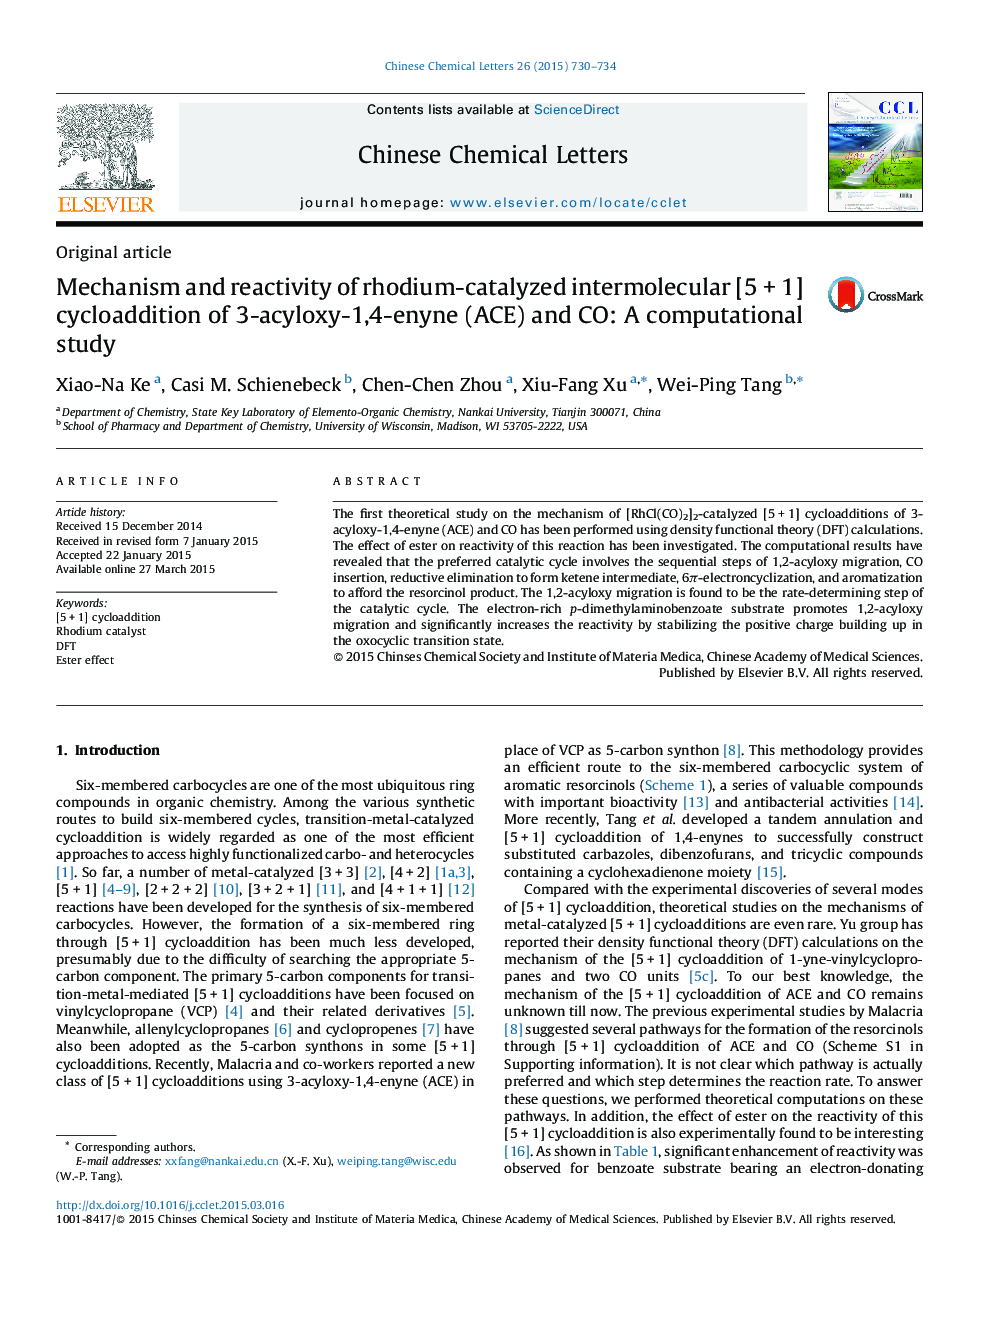 Mechanism and reactivity of rhodium-catalyzed intermolecular [5 + 1] cycloaddition of 3-acyloxy-1,4-enyne (ACE) and CO: A computational study